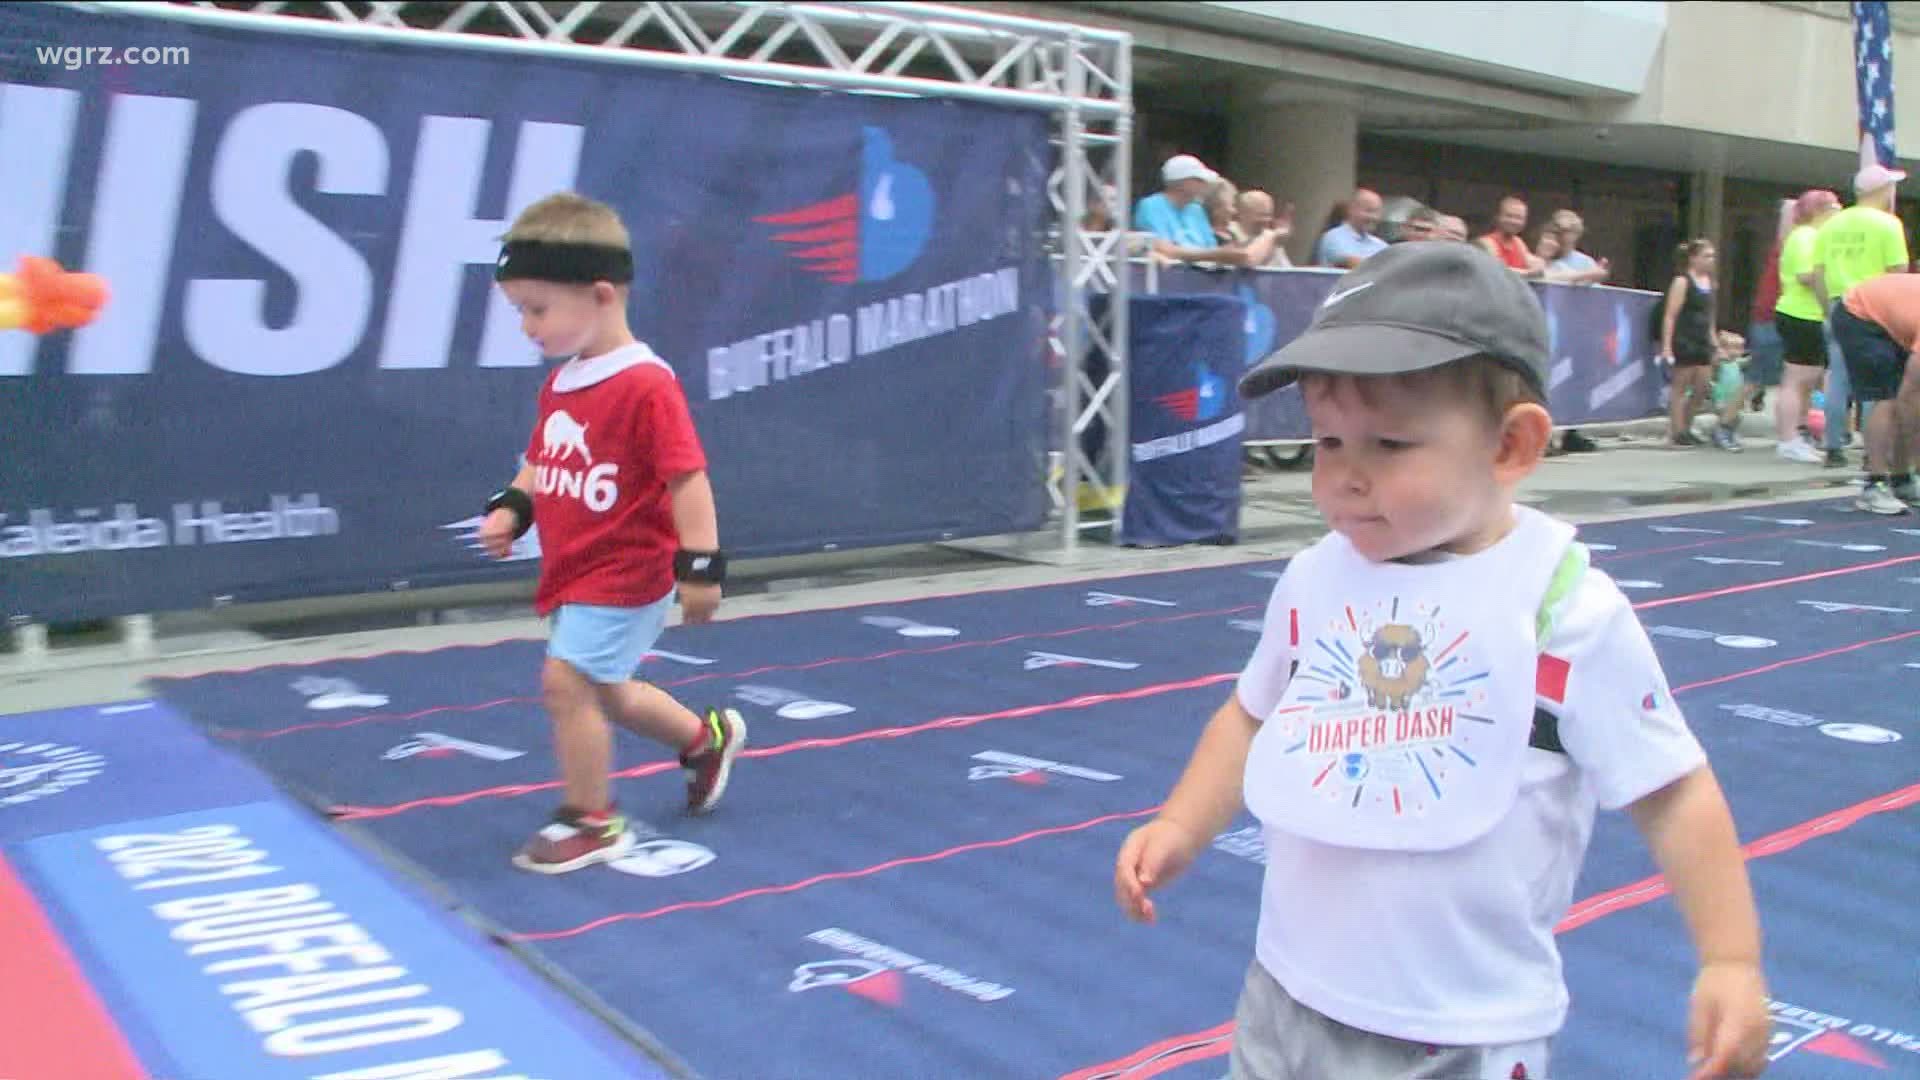 The 5K race was held Saturday morning, as well as the kids mini-marathon and the diaper dash.